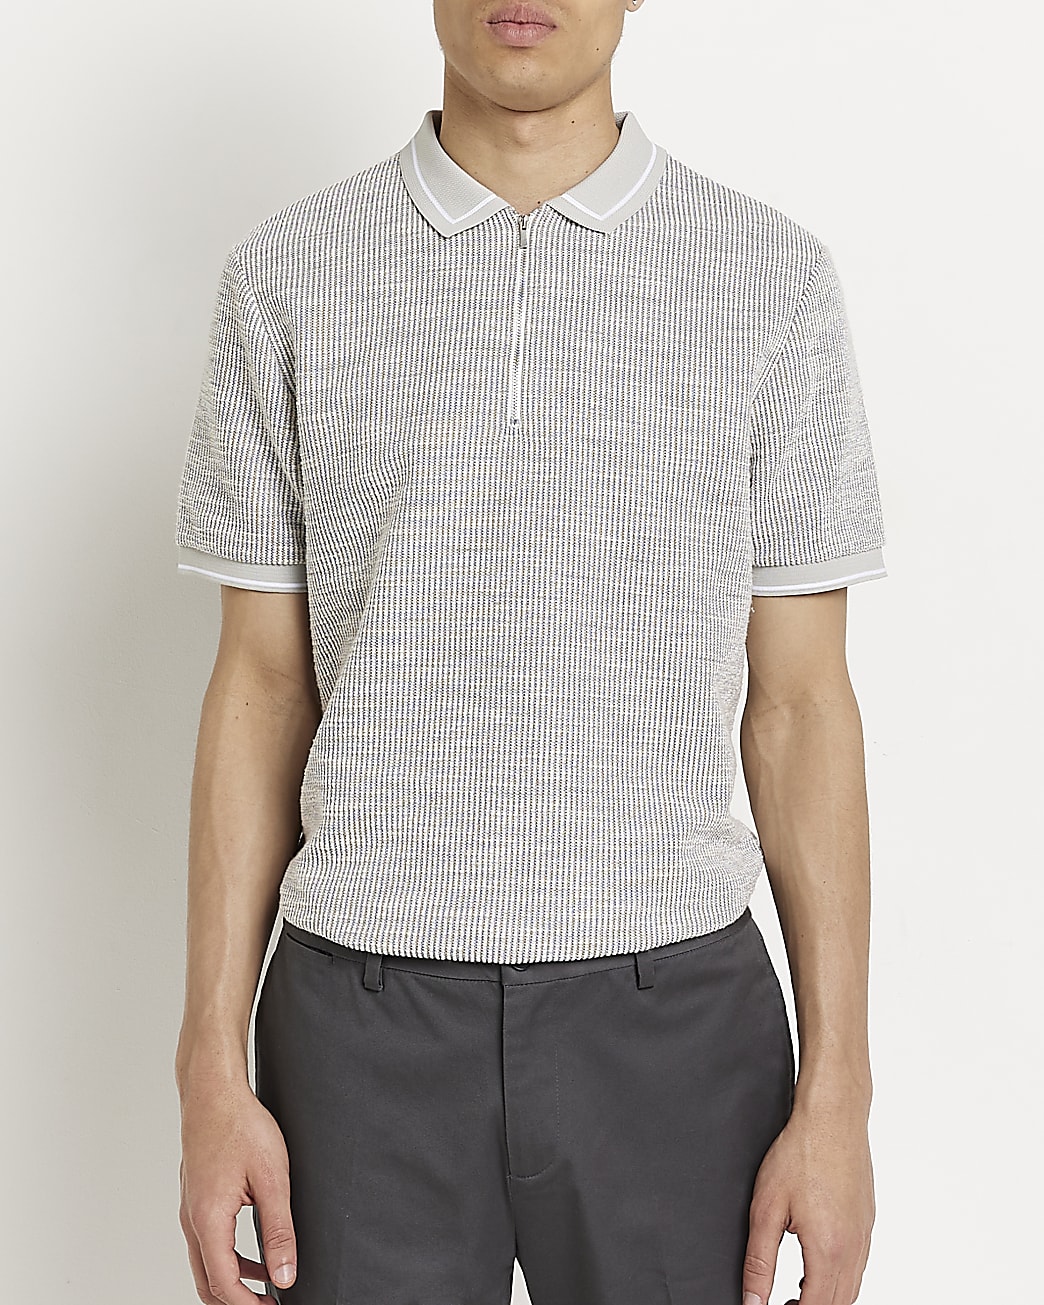 Grey slim fit textured polo shirt